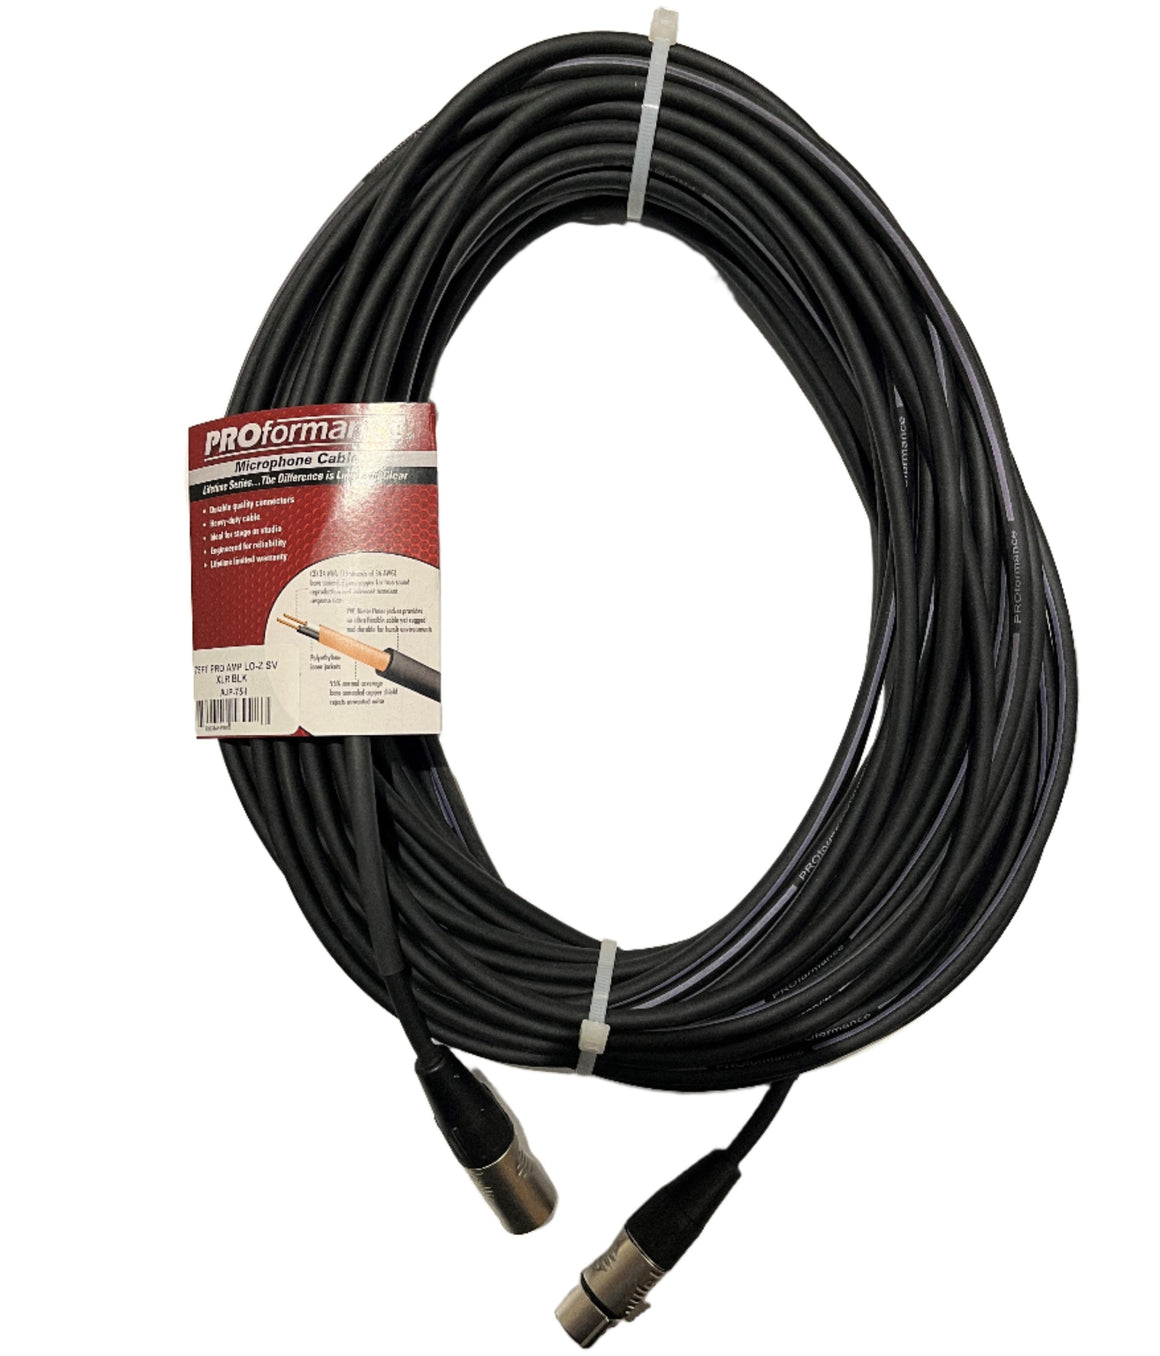 PROformance AJP75 75' Microphone Cable